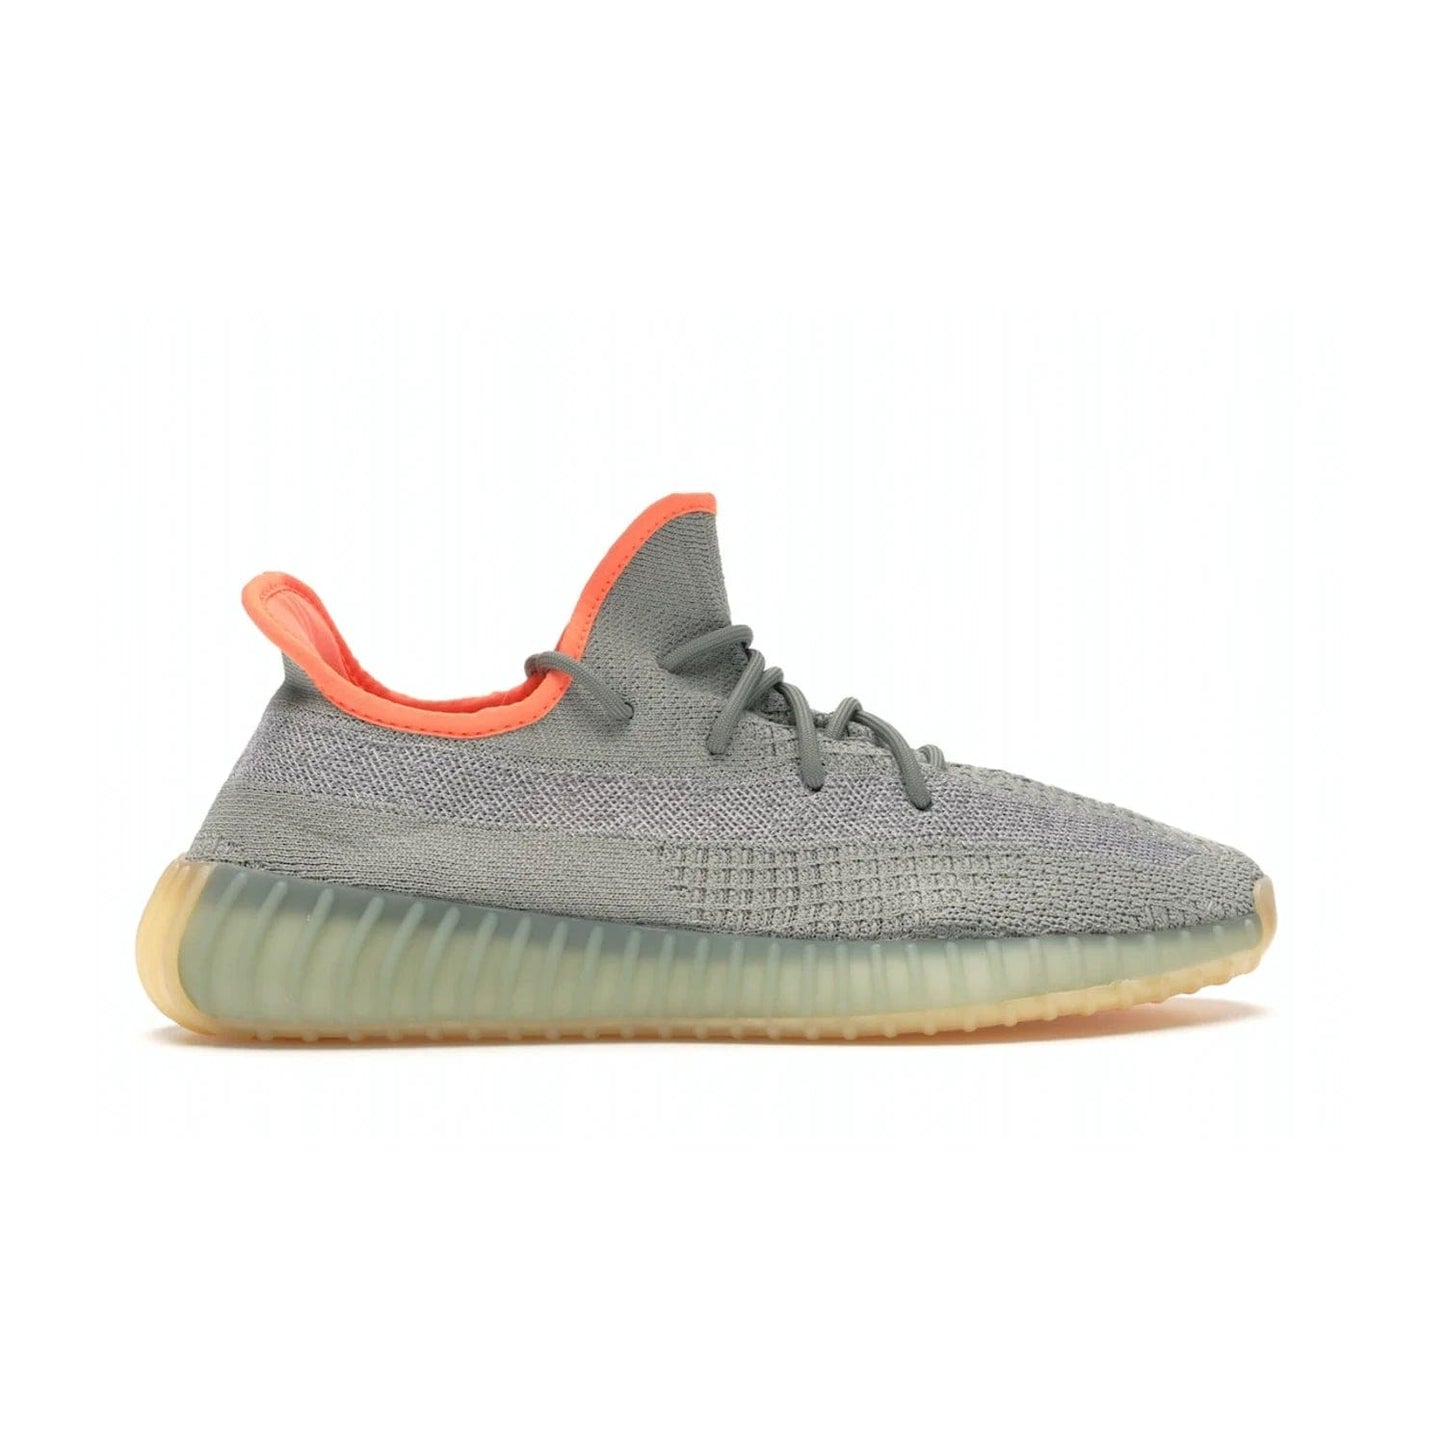 adidas Yeezy Boost 350 V2 Desert Sage - Image 36 - Only at www.BallersClubKickz.com - Upgrade your style with the adidas Yeezy Boost 350 V2 Desert Sage. This 350V2 features a Desert Sage primeknit upper with tonal side stripe, and an orange-highlighted translucent Boost cushioning sole. Stay on-trend in effortless style.